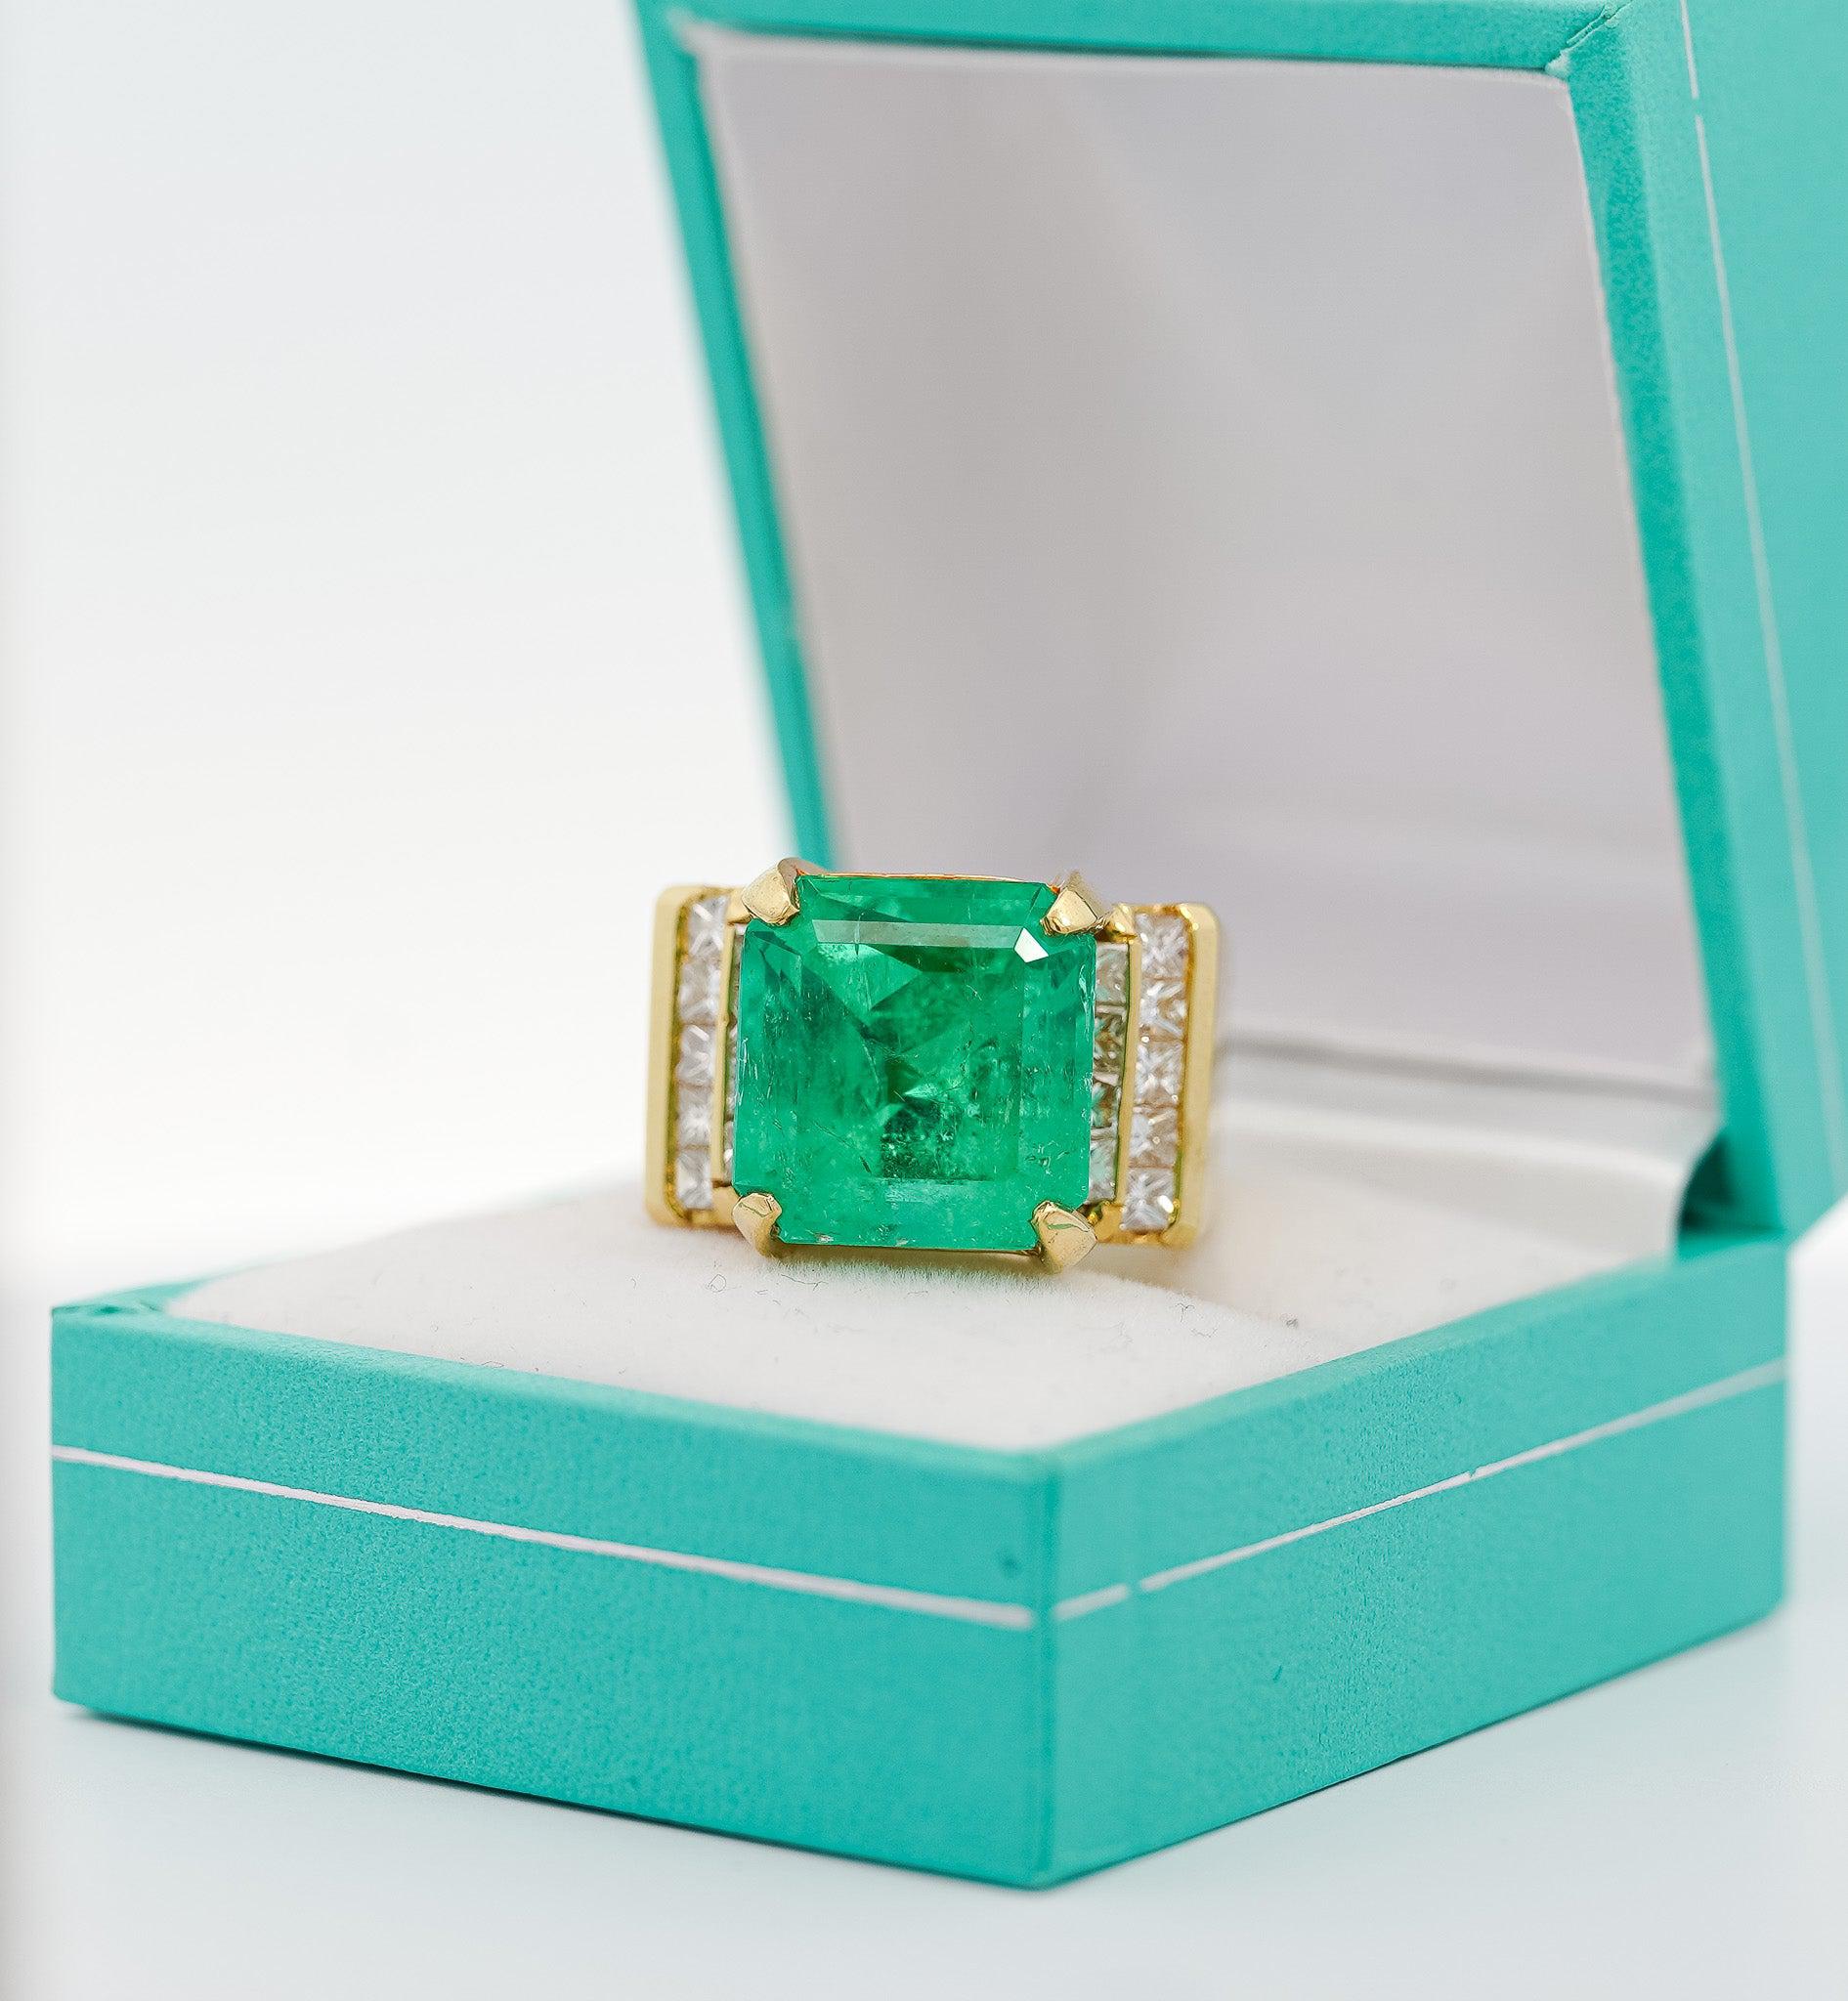 GIA Certified 13 Carat Colombian Emerald Men's Ring in 18K Gold With Princess Cut Diamonds